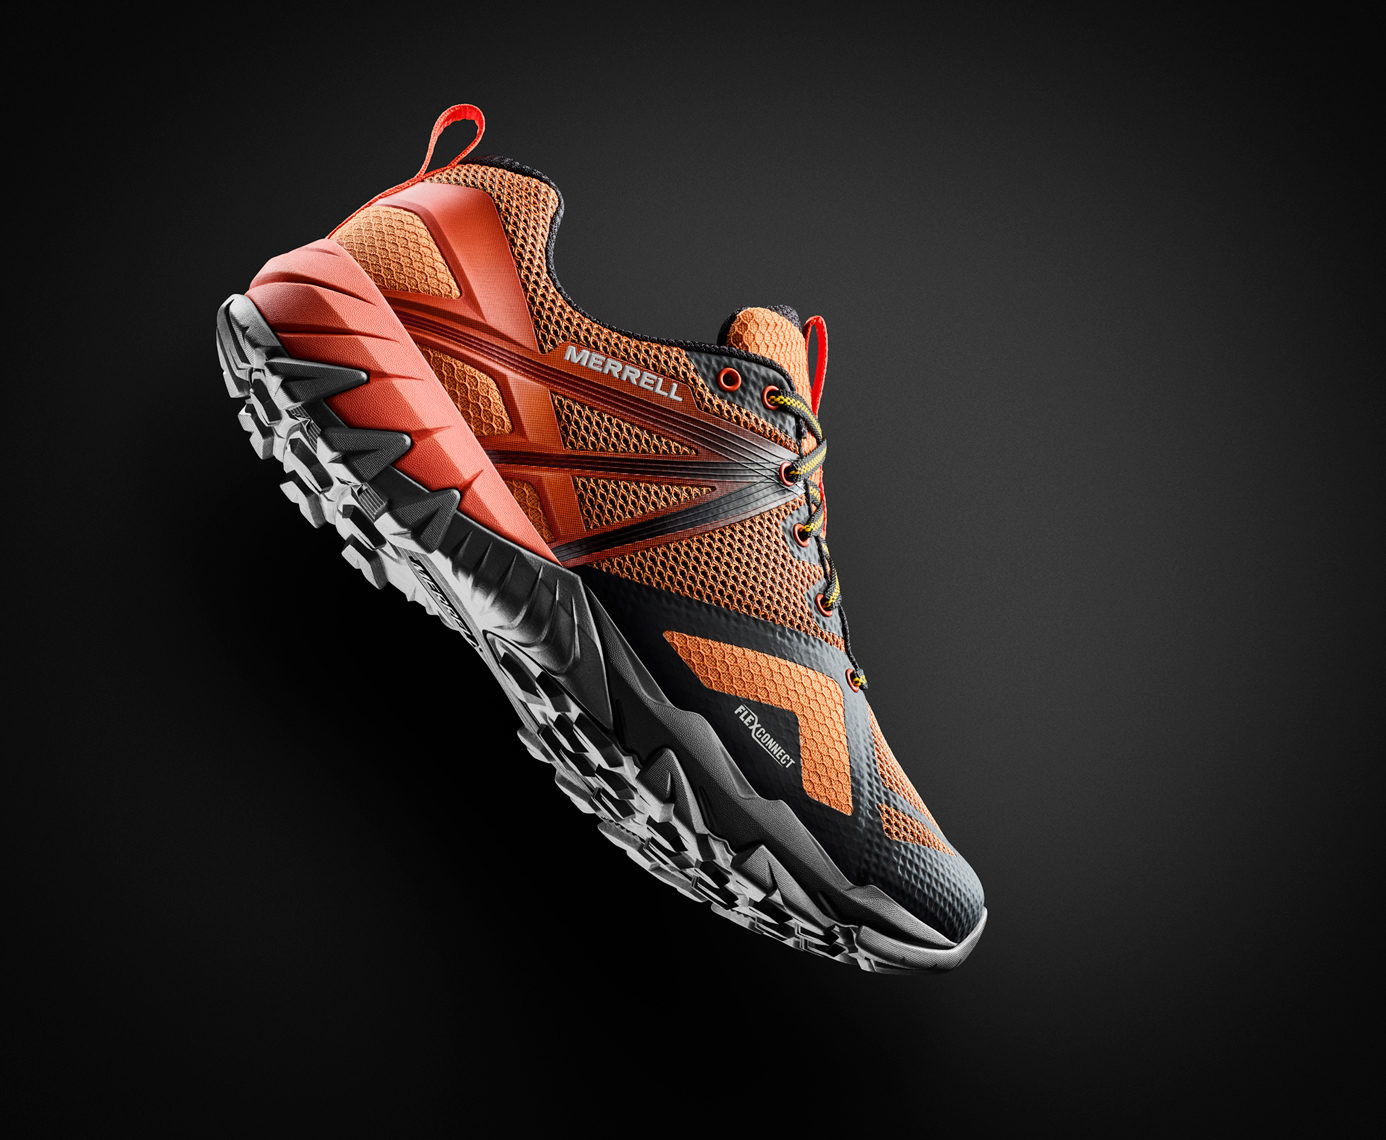 Merrell Footwear Image Retouching and Environment Creation